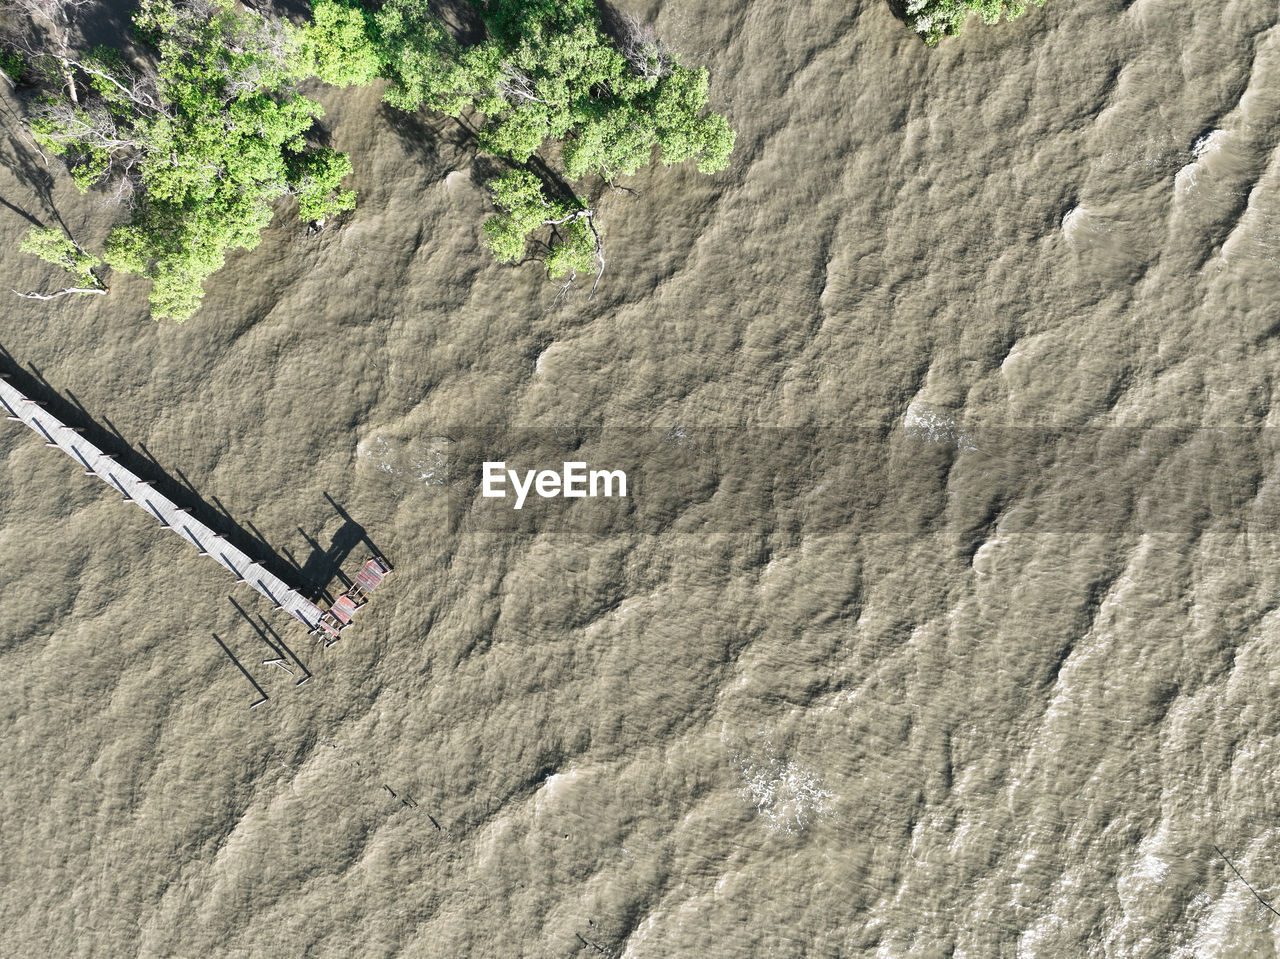 Aerial view green mangrove trees, wooden bridge, and seawater. net zero emissions. natural carbon